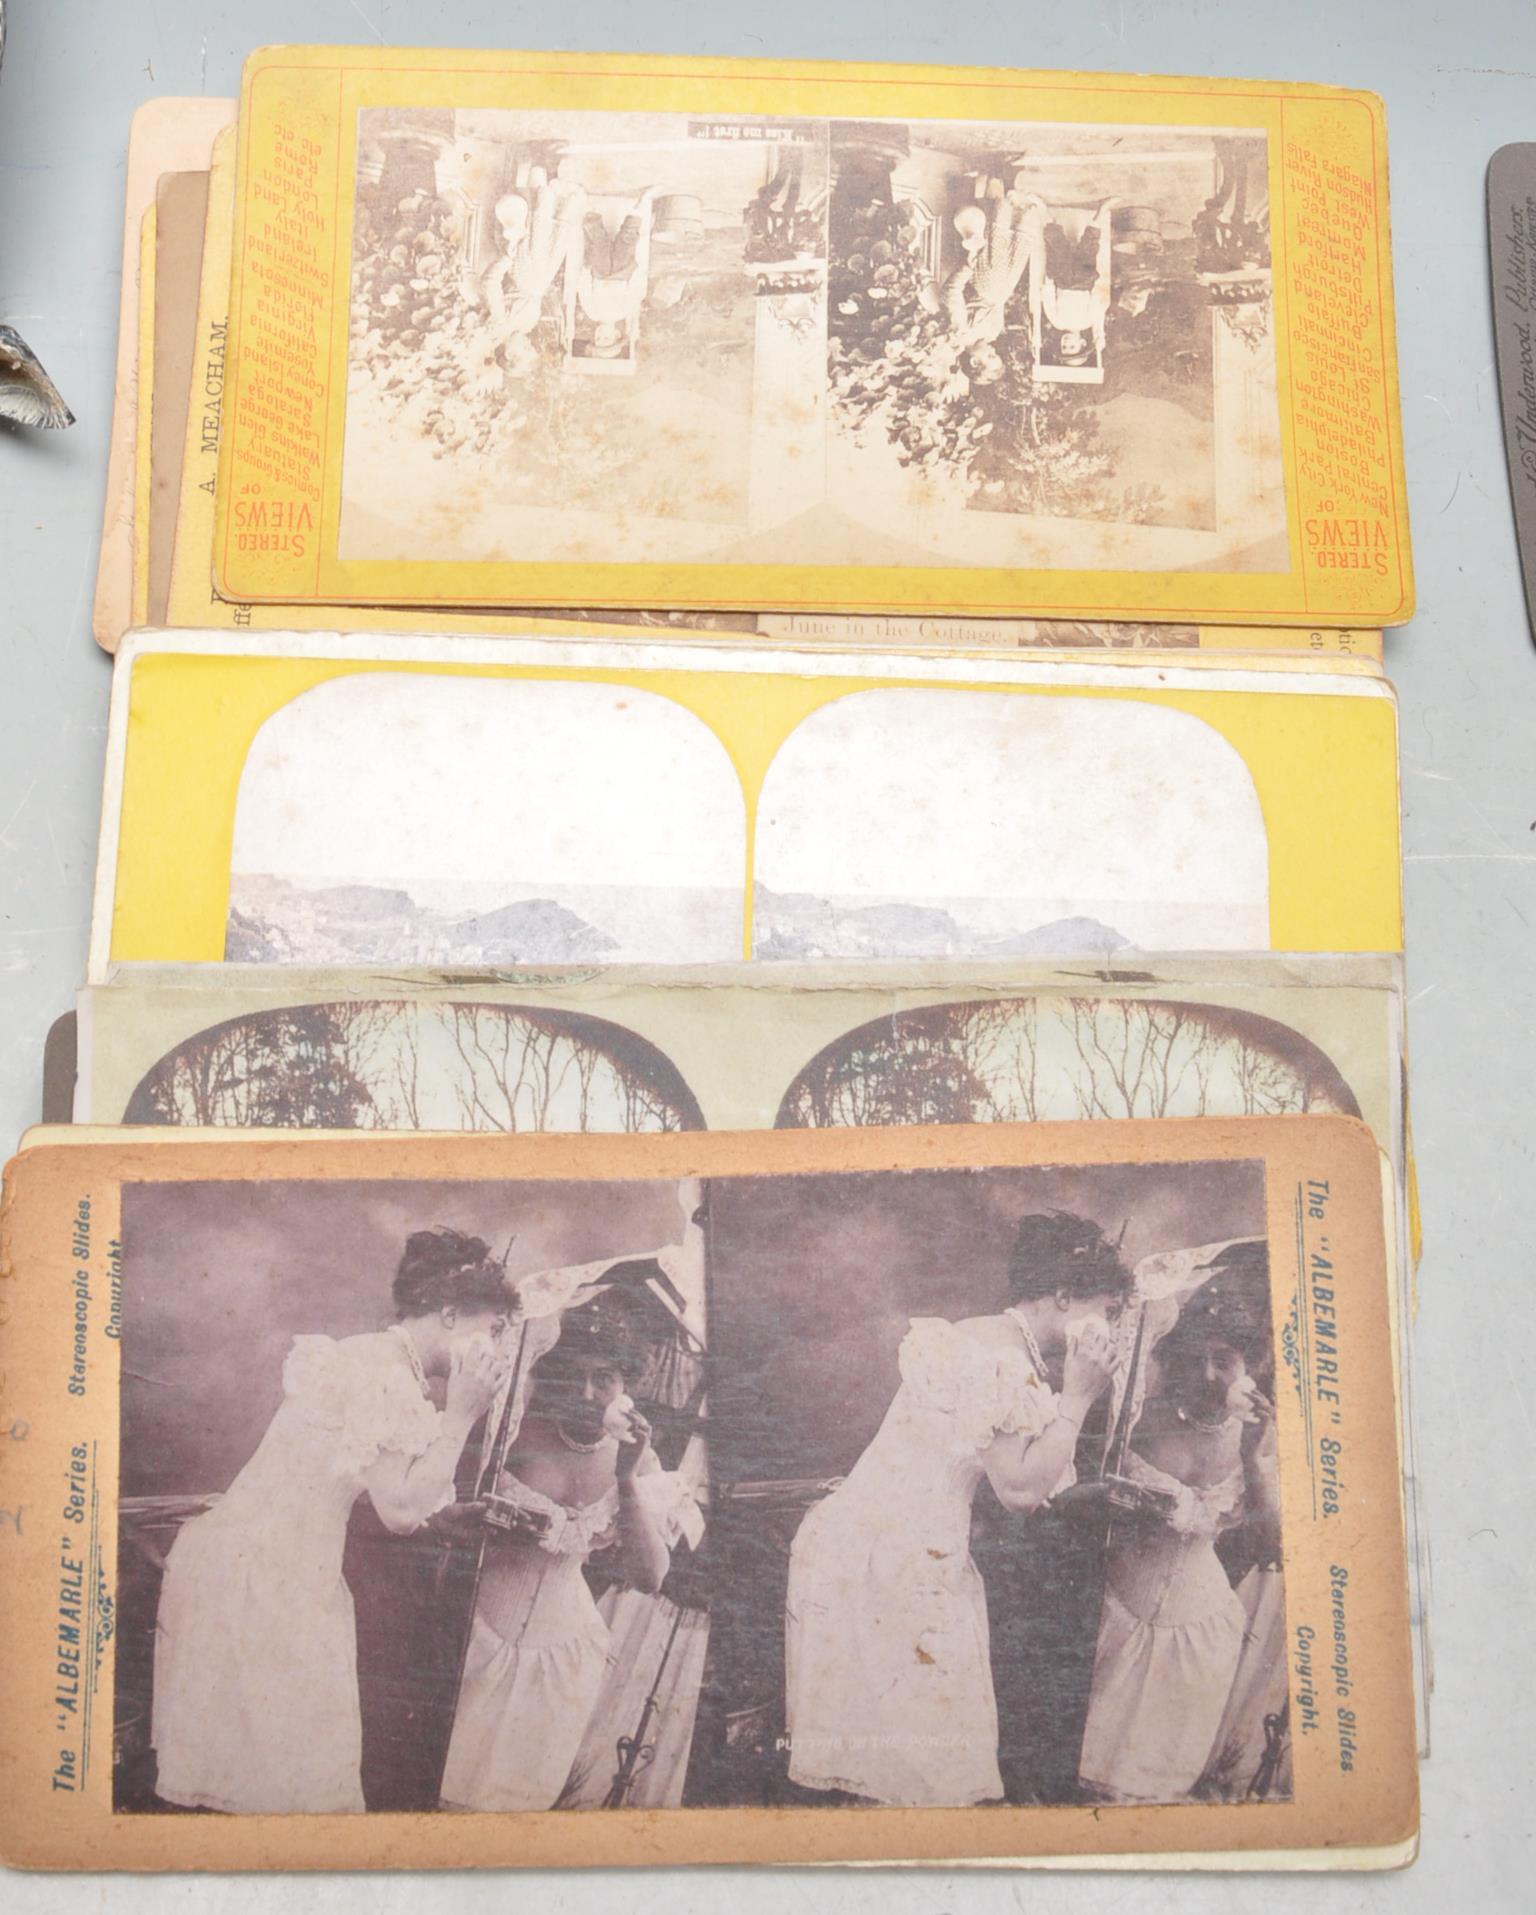 VICTORIAN / EDWARDIAN STEREOSCOPIC / STEREOSCOPE VIEWER & SLIDES - Image 11 of 11